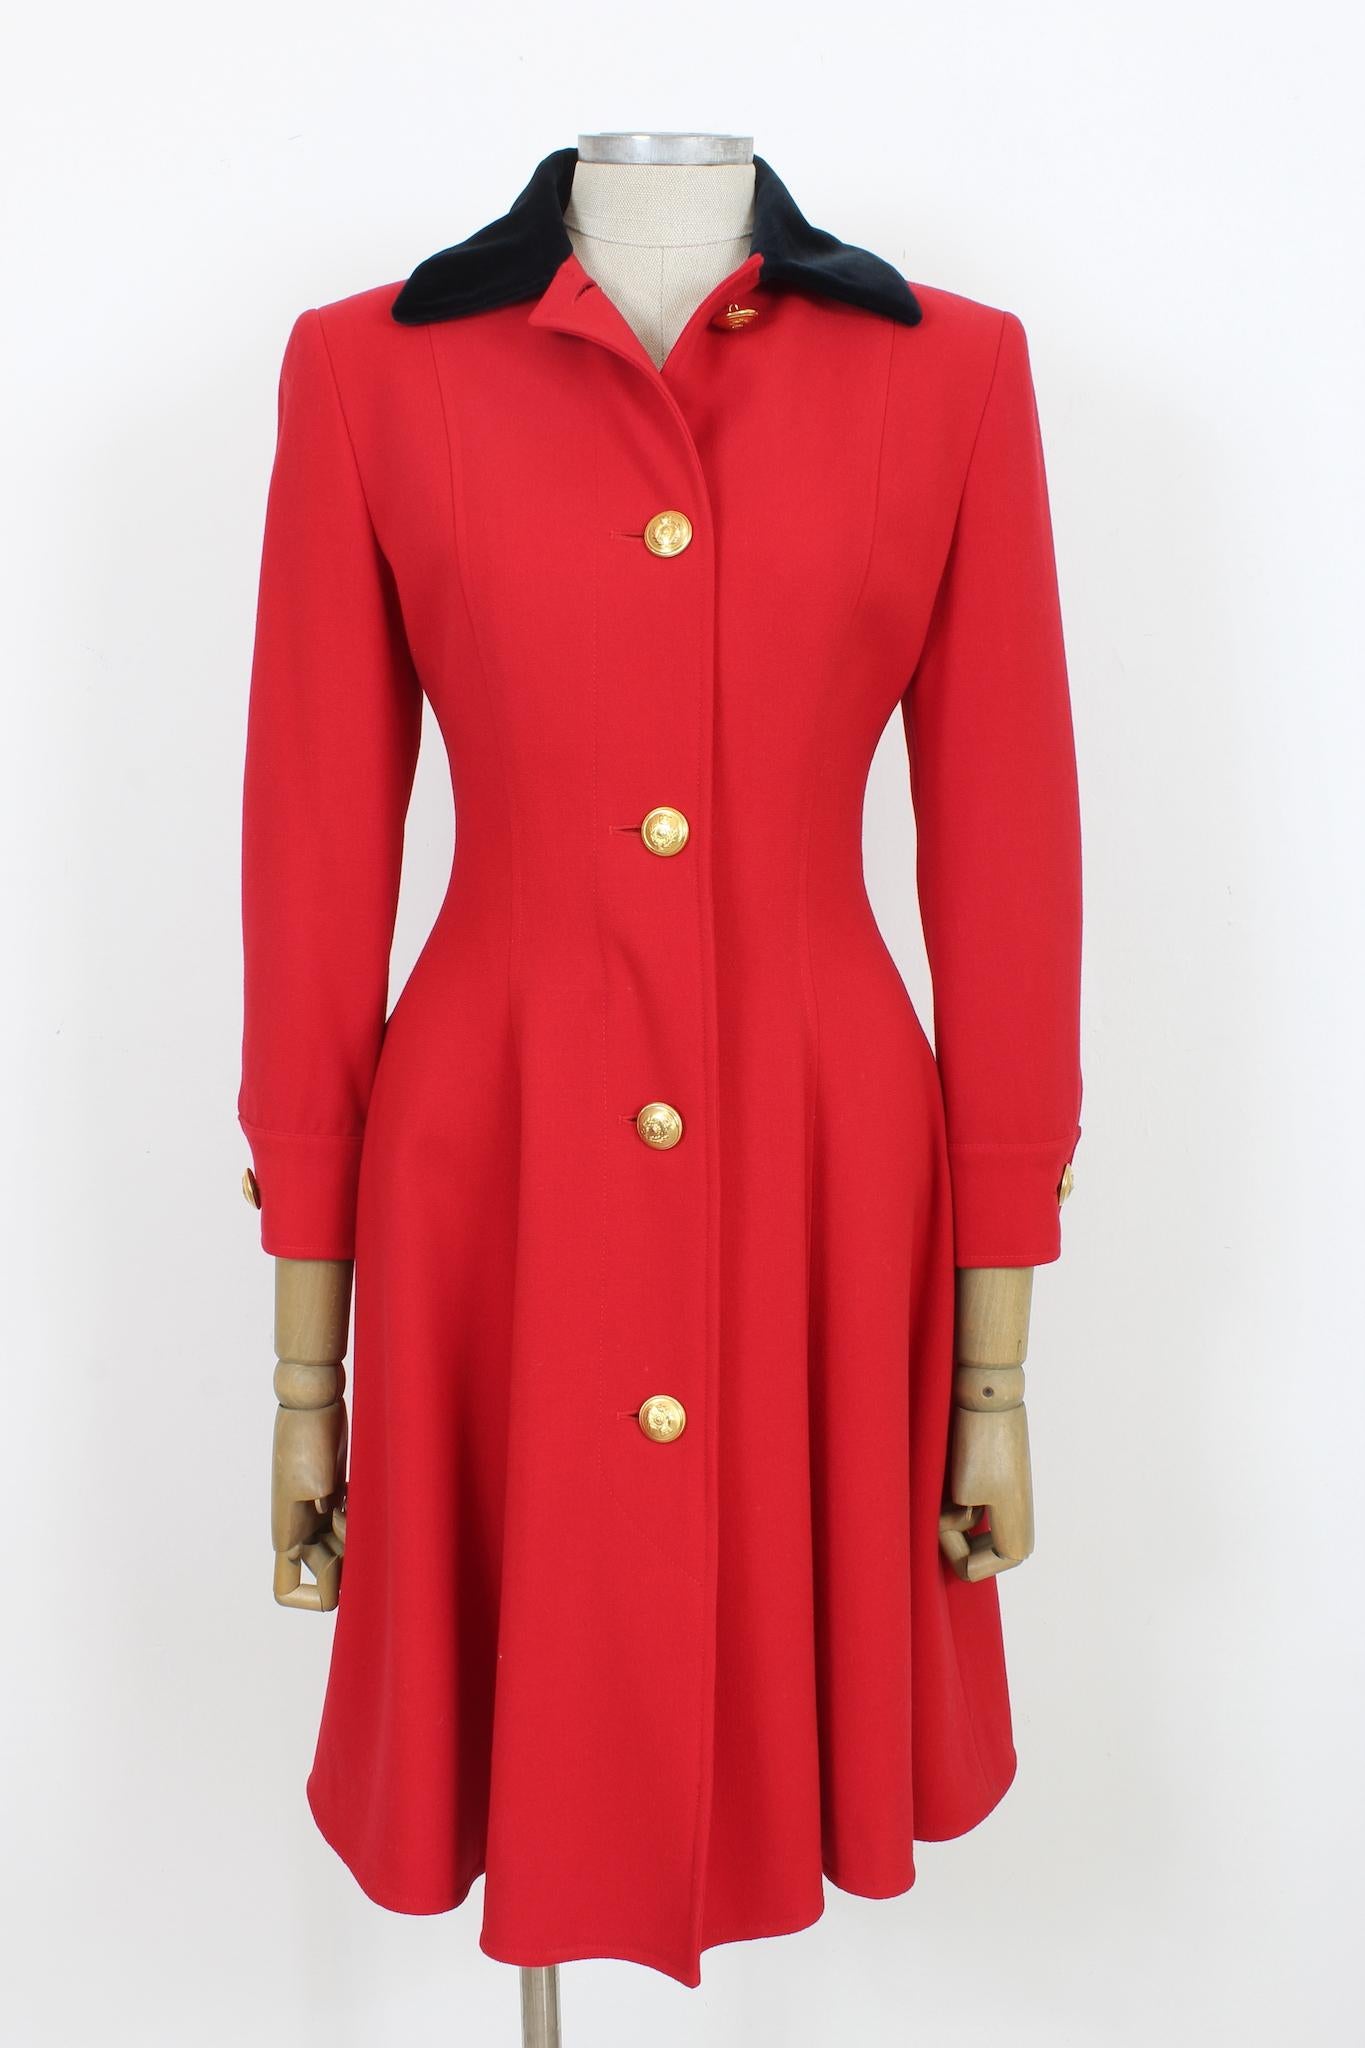 This Genny red wool vintage classic flared dress is a timeless 90s piece perfect for any evening event. Crafted in warm wool and featuring a luxurious velvet collar, this flared dress boasts a timeless classic look and button gold details. Let your